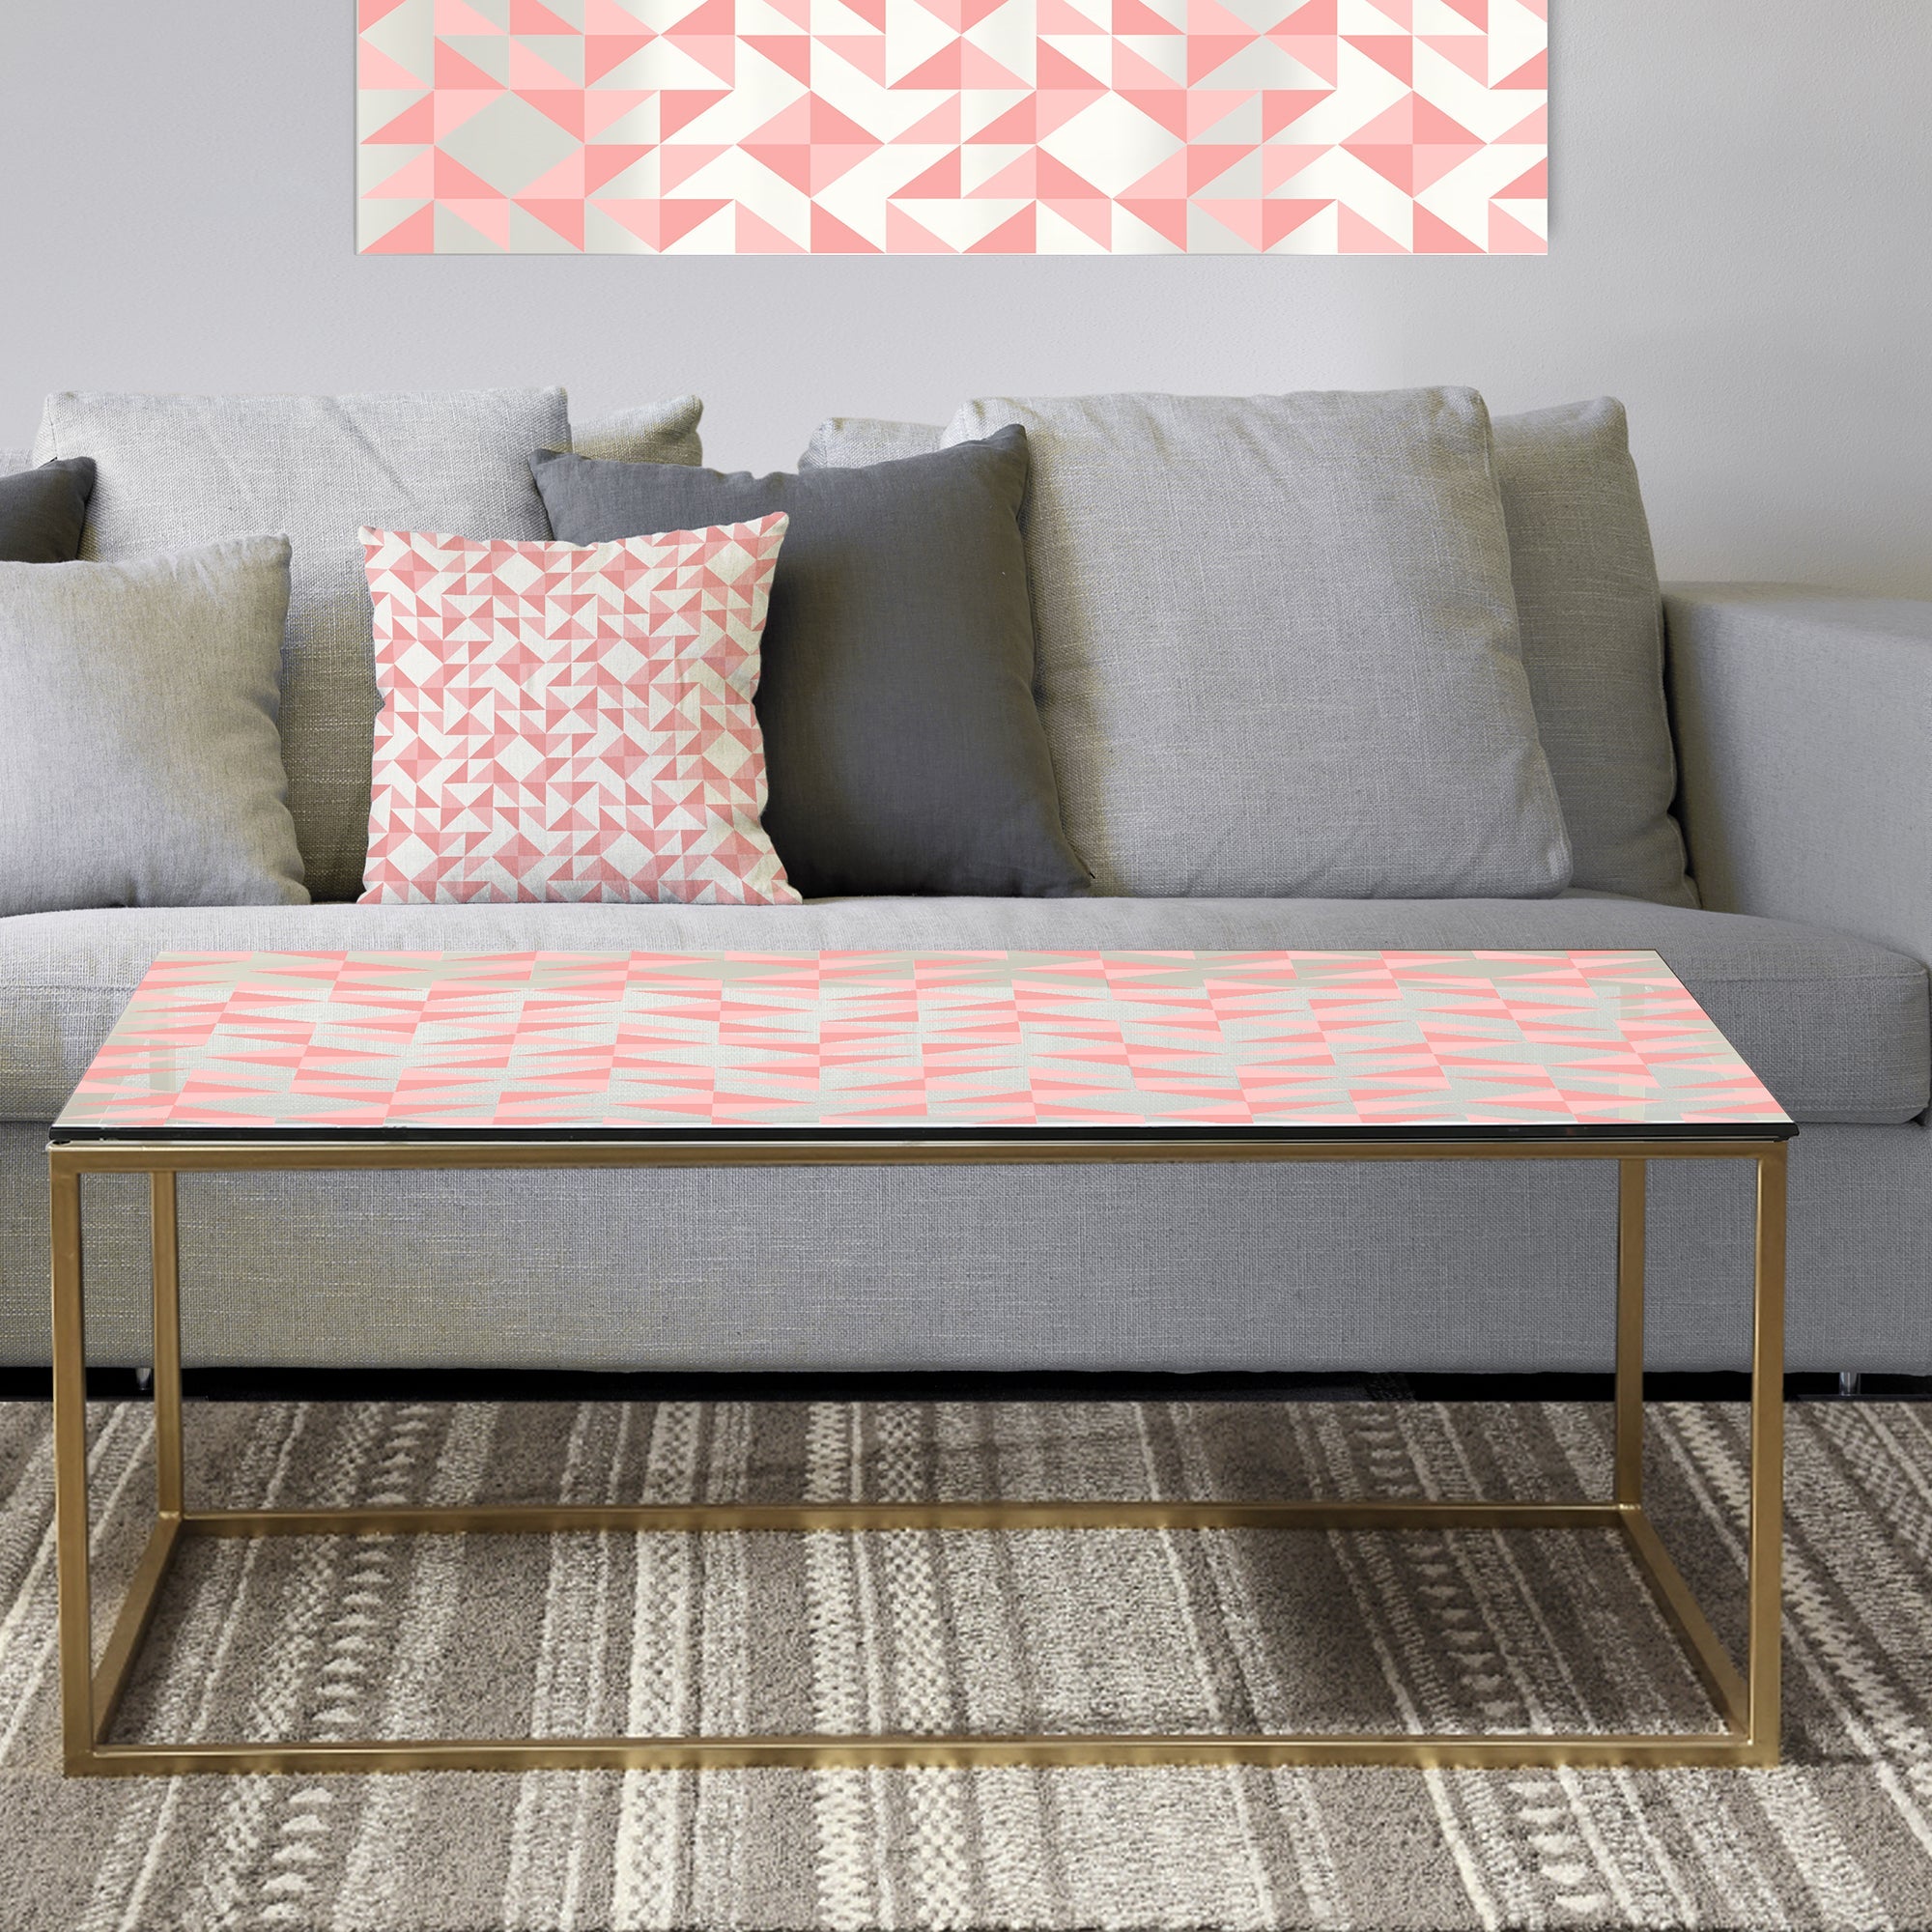 Abstract geometric pattern, patchwork quilting - Metal Glam Coffee Table